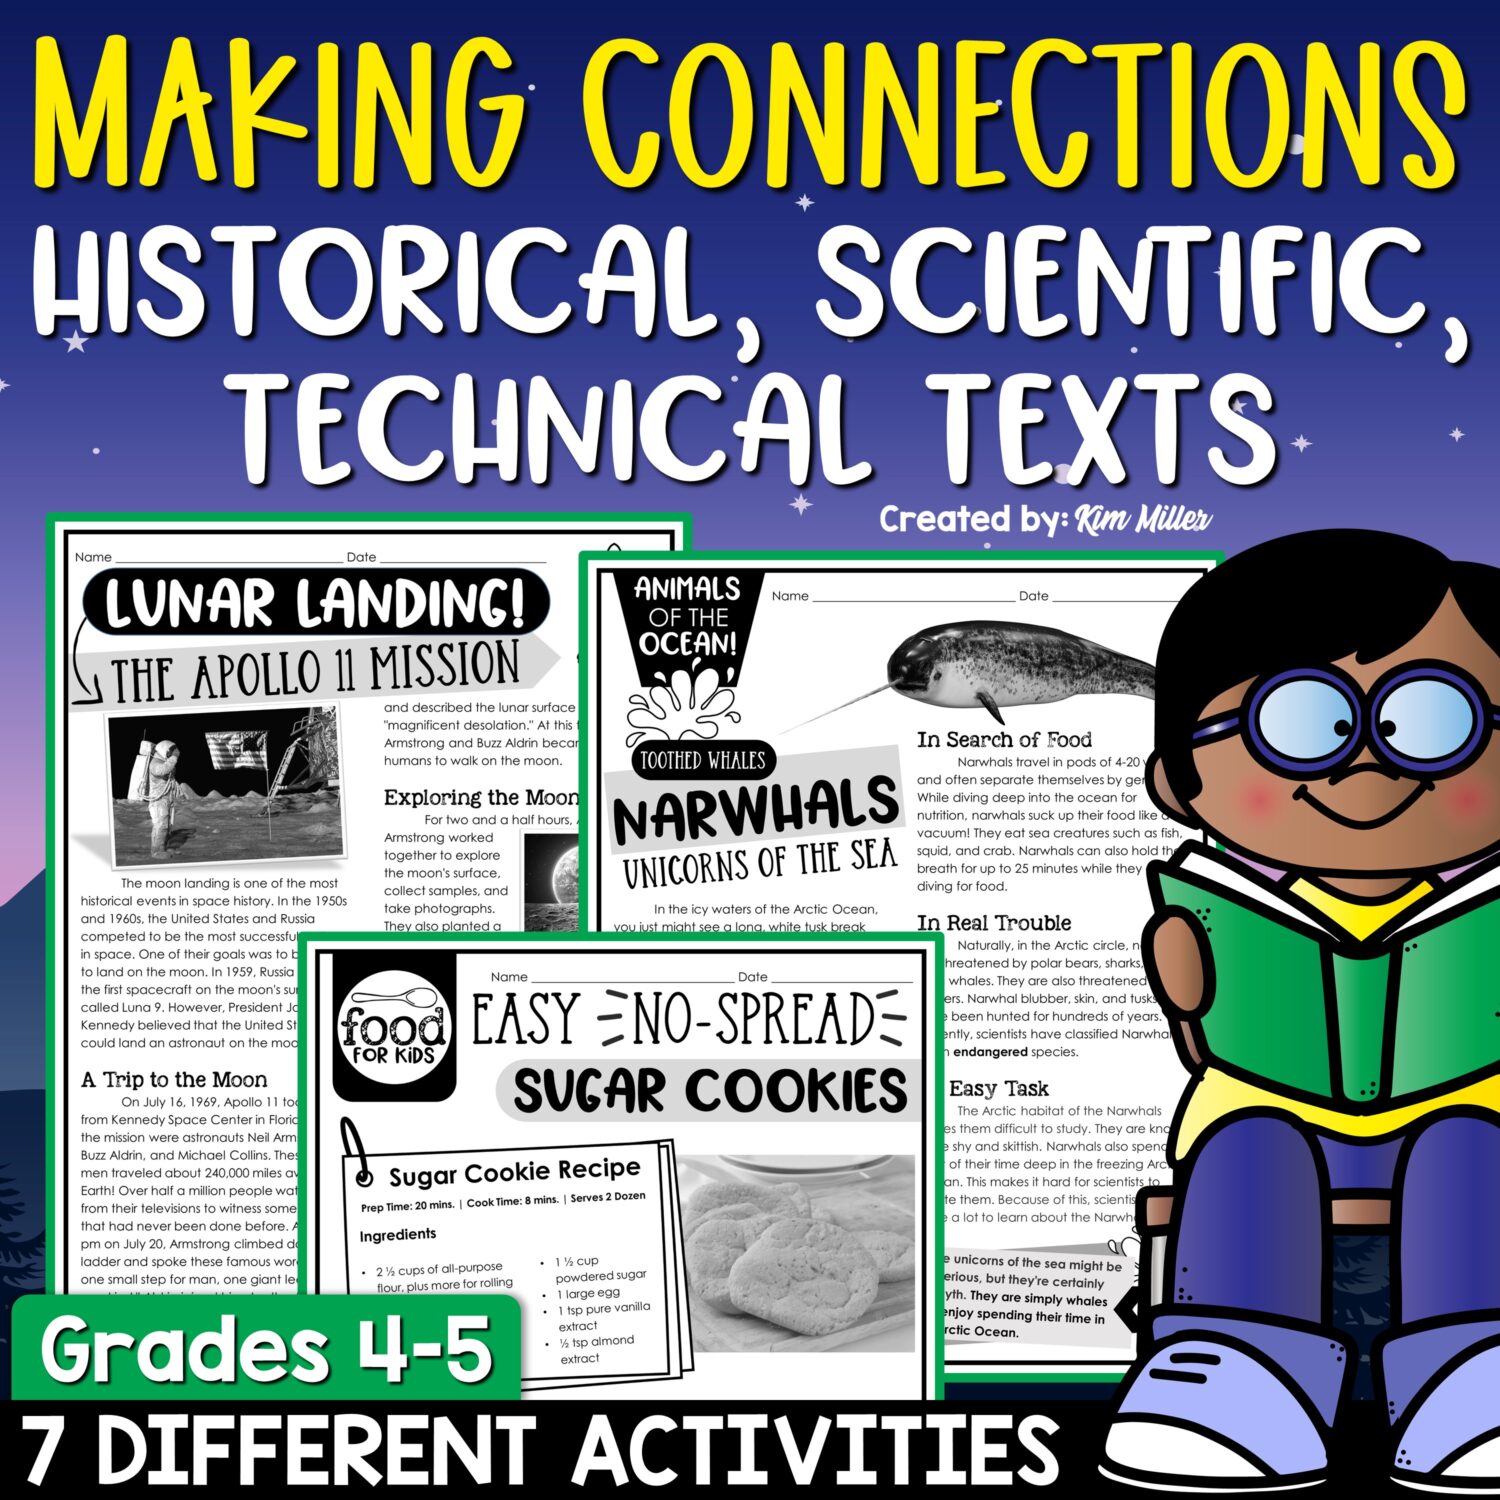 Historical, Scientific, and Technical Texts